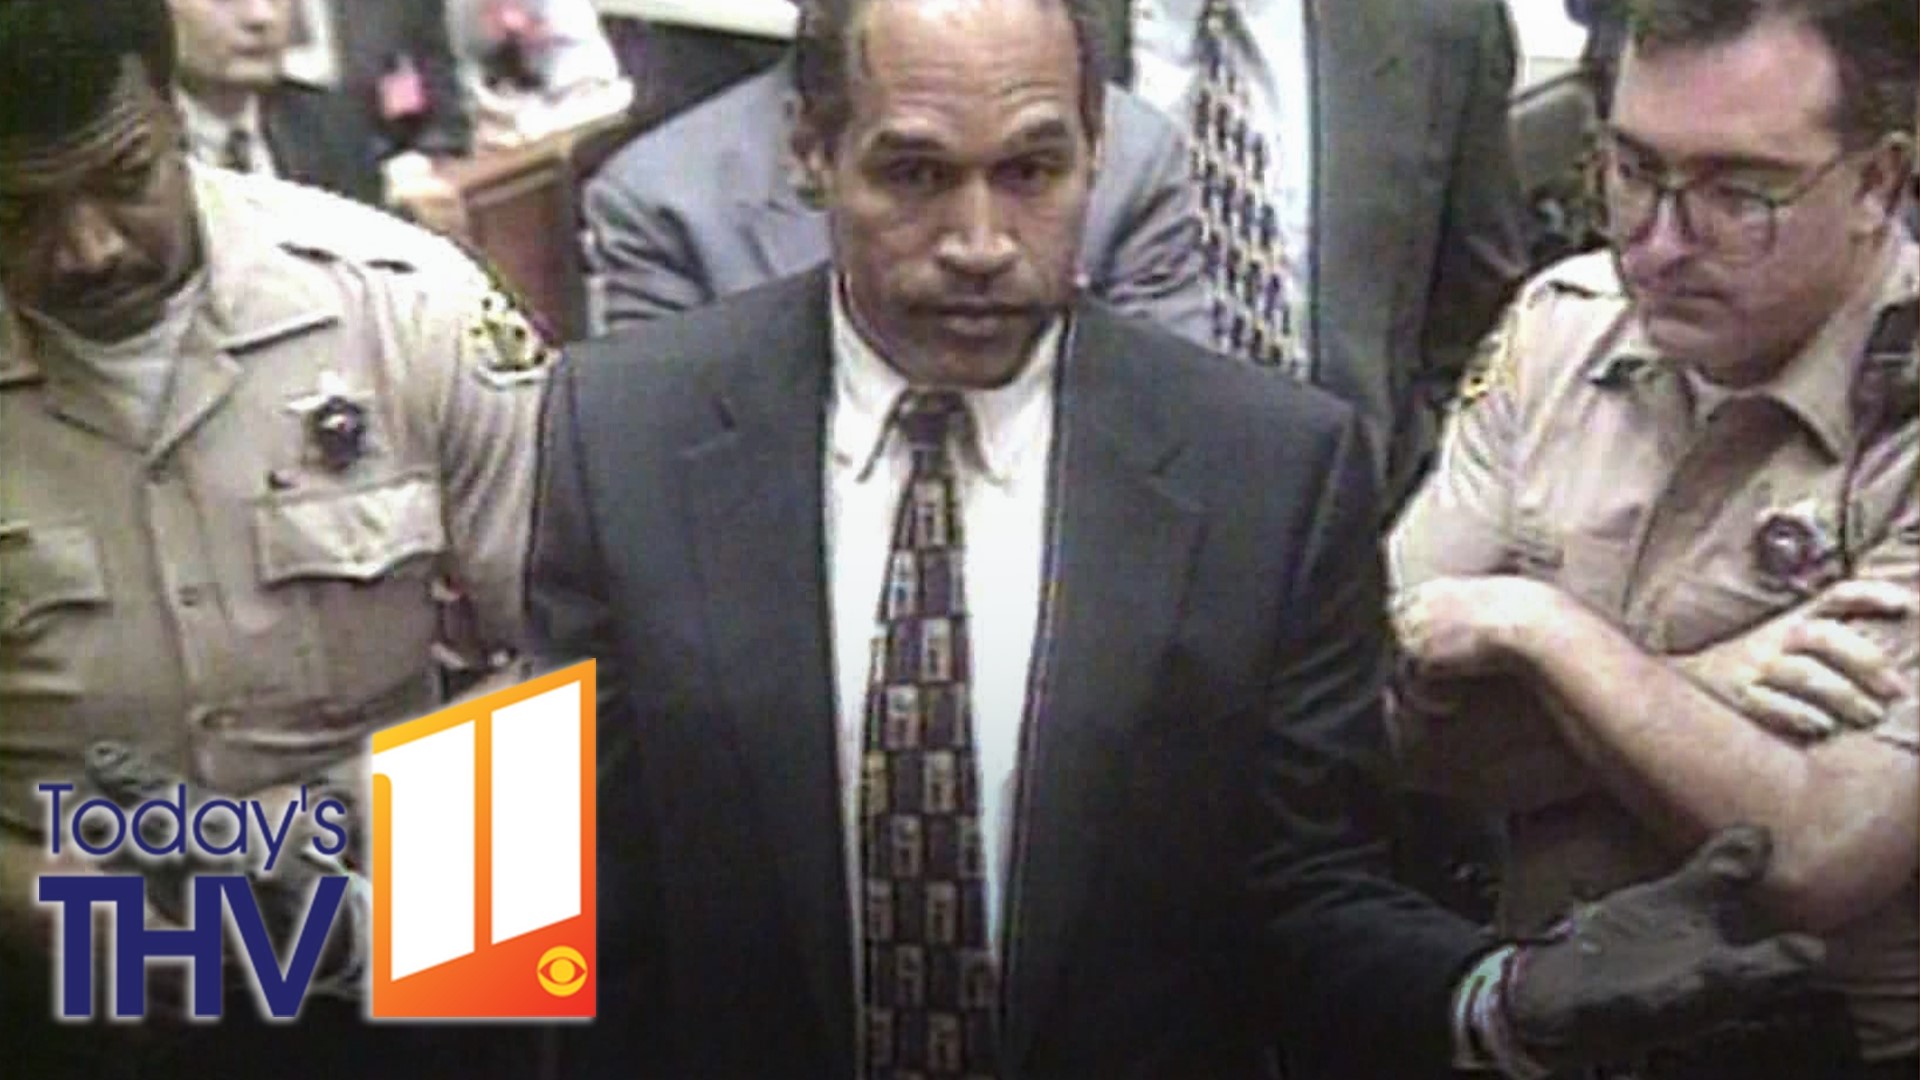 On Oct. 3, 1995, O.J. Simpson was acquitted on two counts of murder. Here is reaction from that day from Arkansans, from our 11 News Vault.